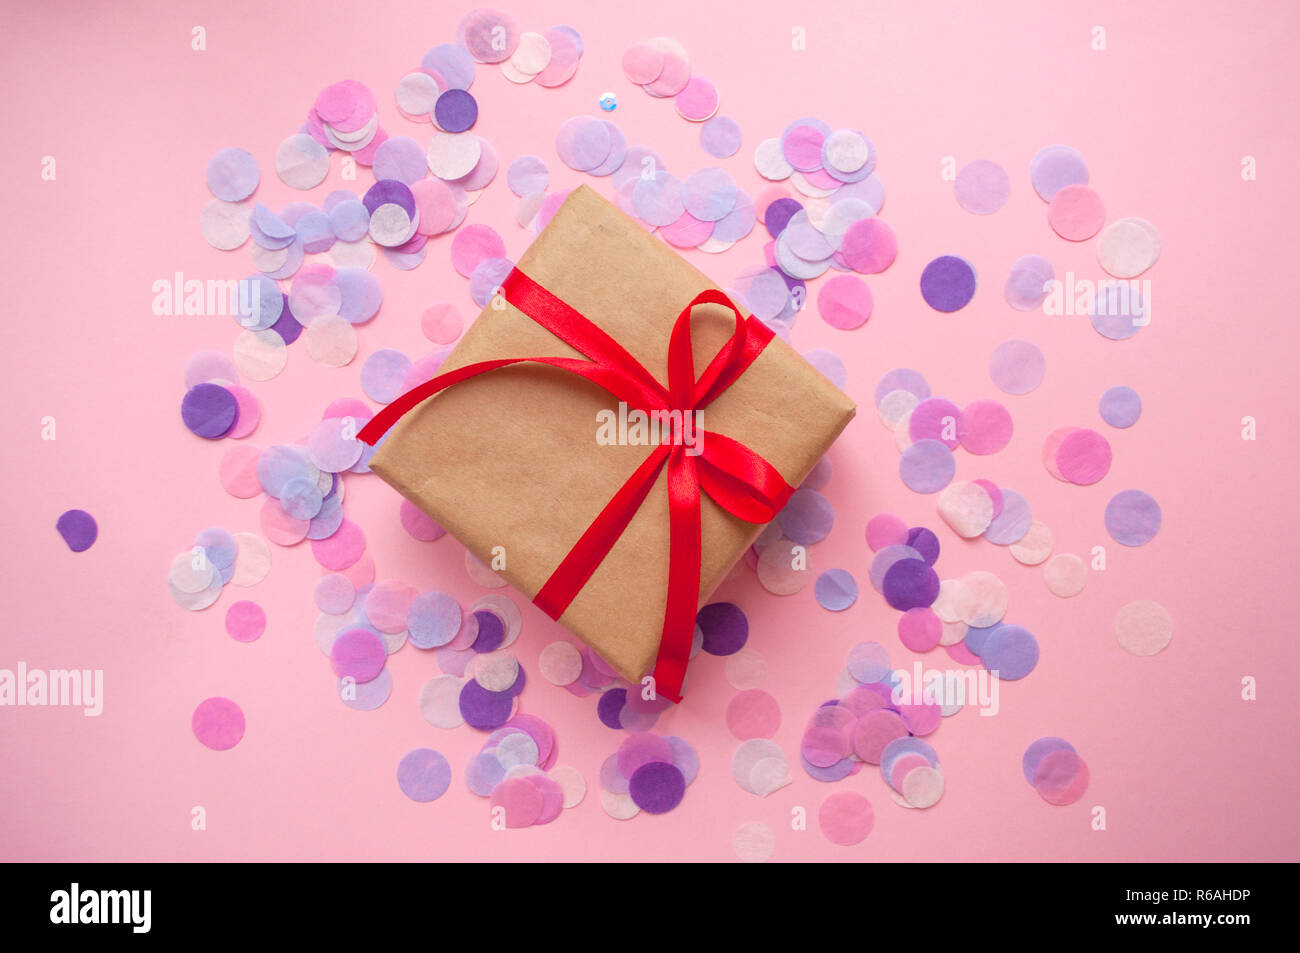 Gift box wrapped in brown colored craft paper and tied with red bow on pink background with colofrul confetti. Stock Photo